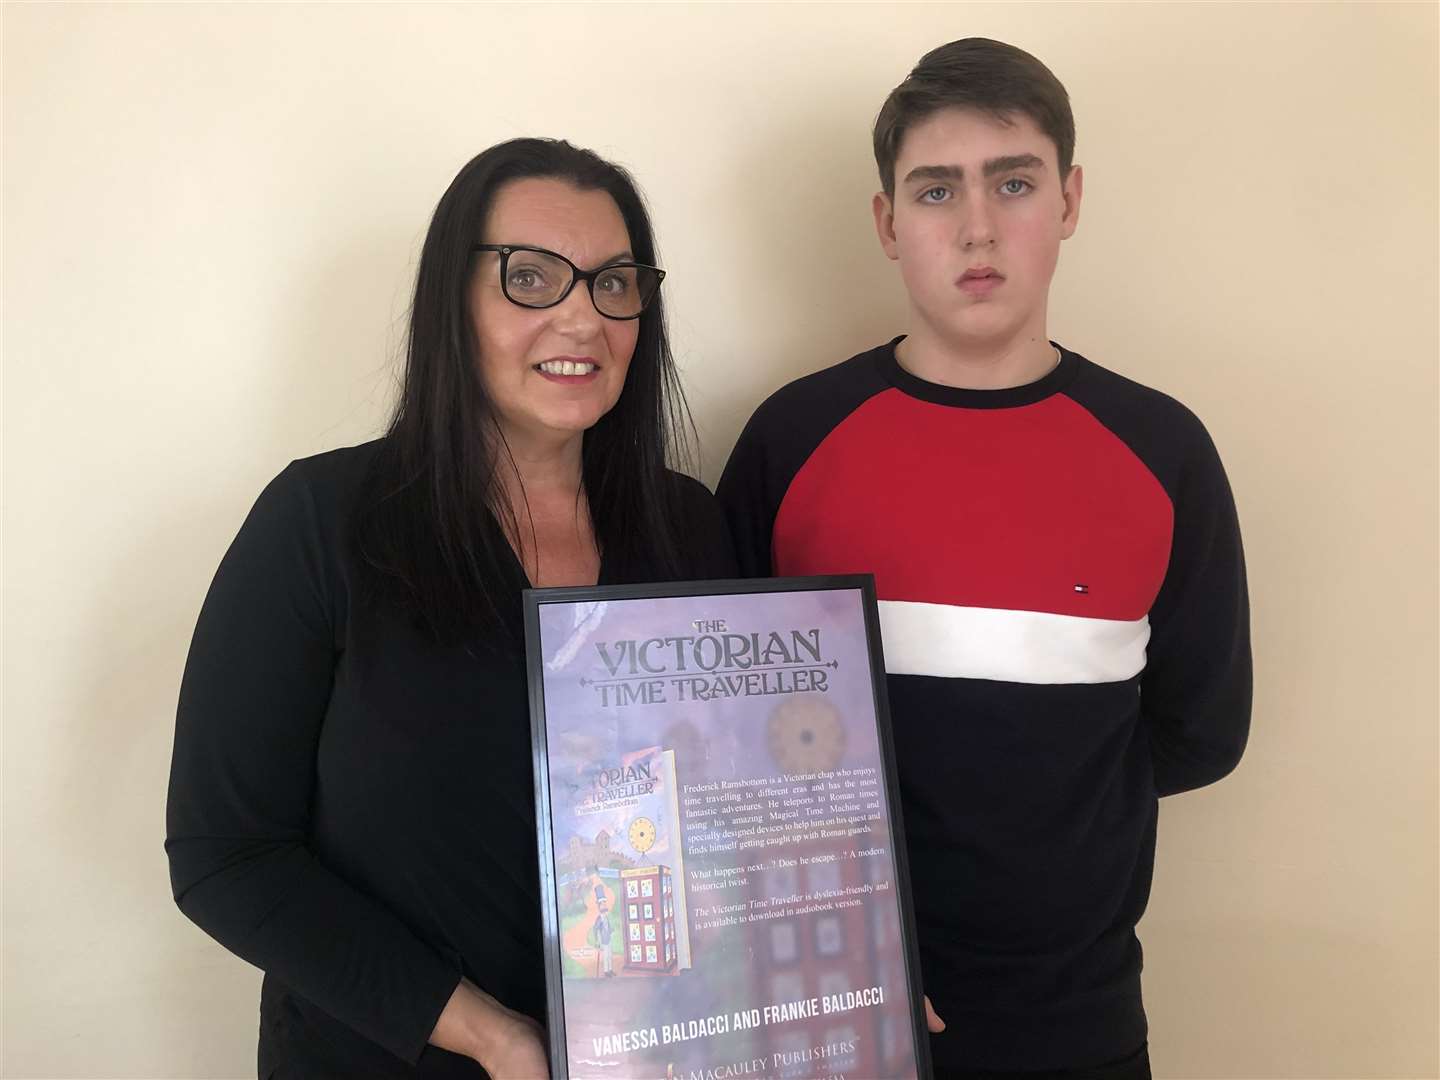 Vanessa and Frankie Baldacci with their first book